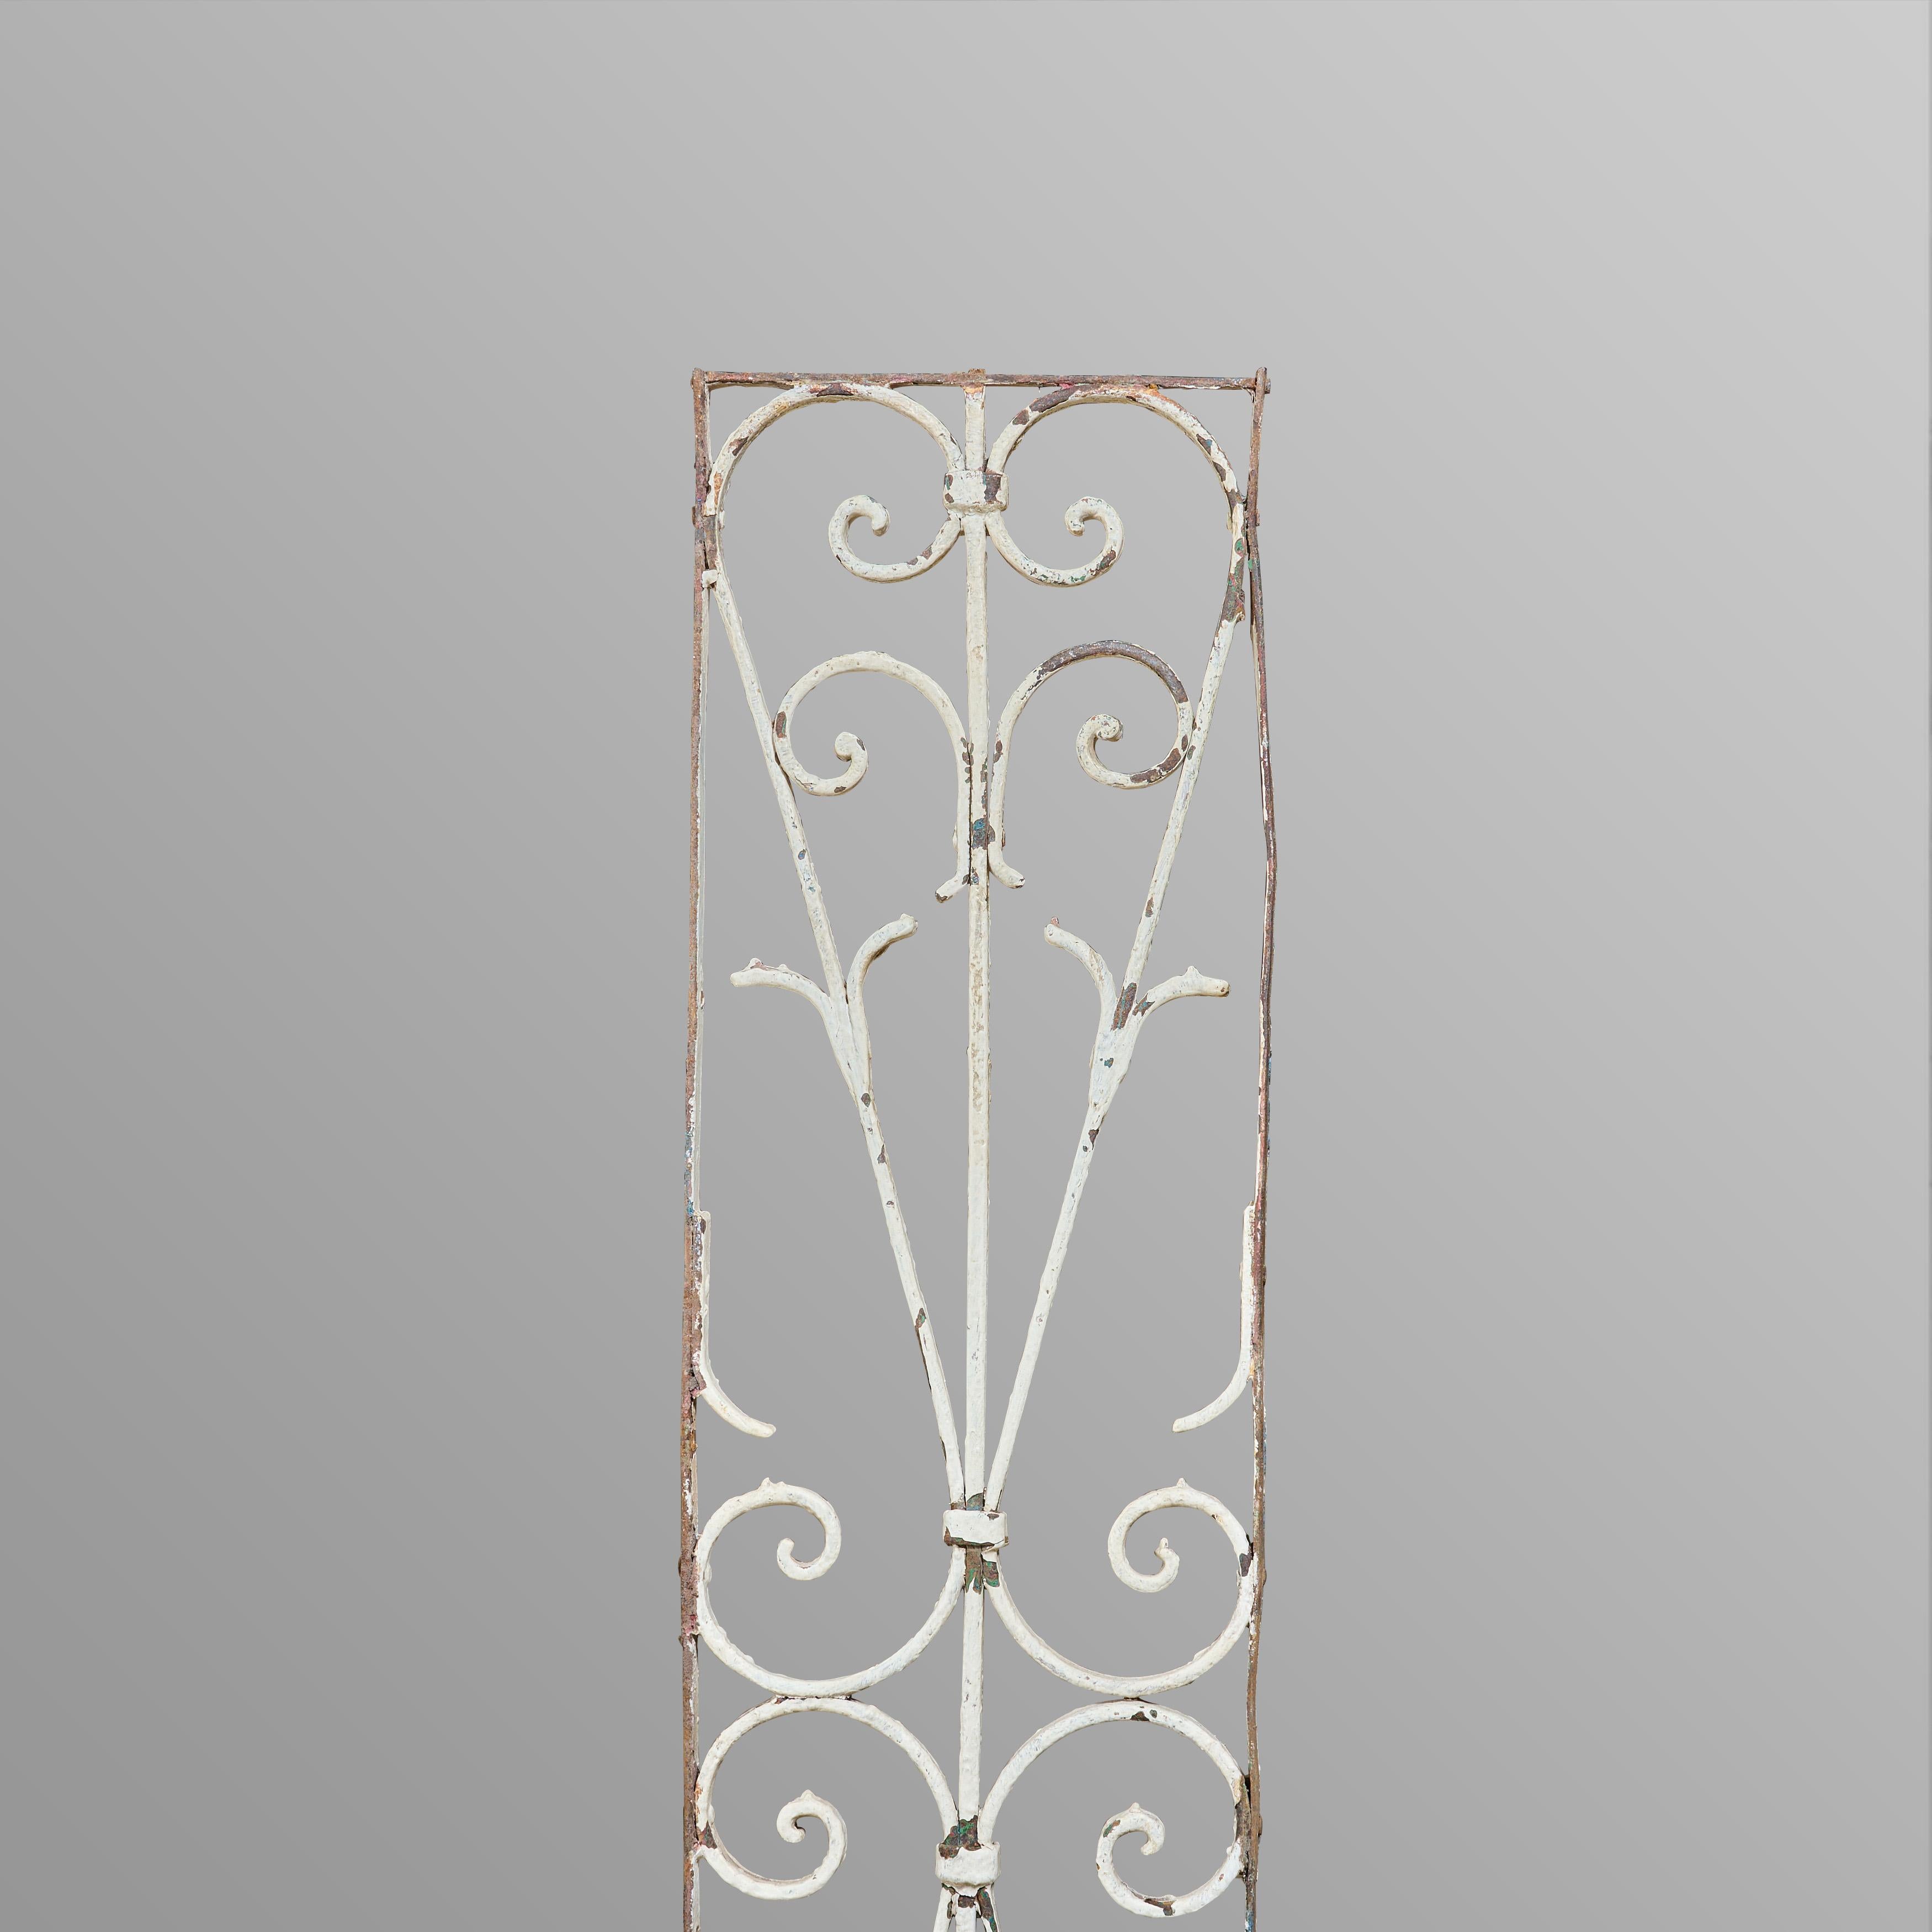 Pair of wrought iron decorative panels with original paint.